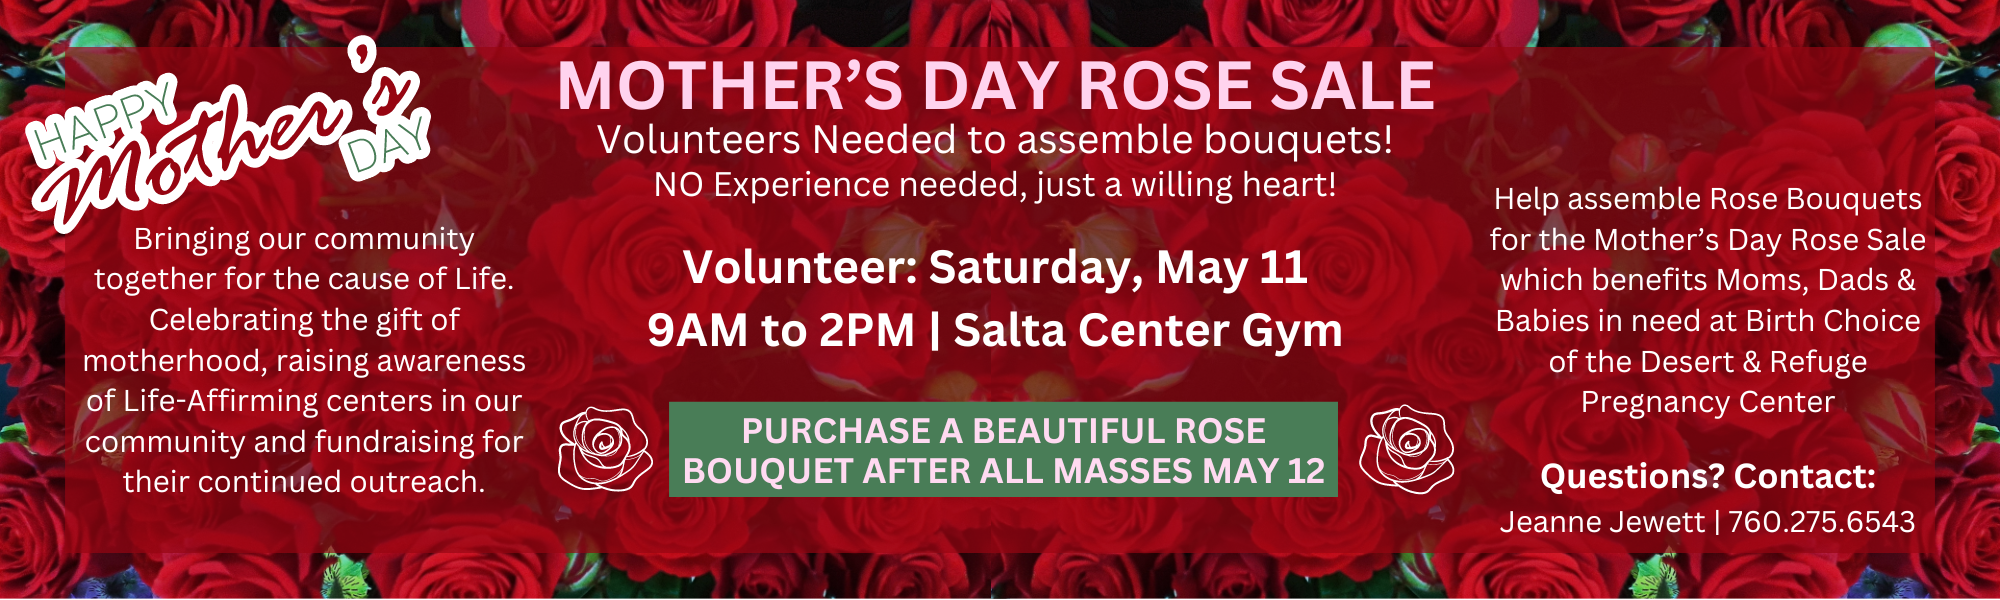 Mother's Day Rose Sale Sun May 12